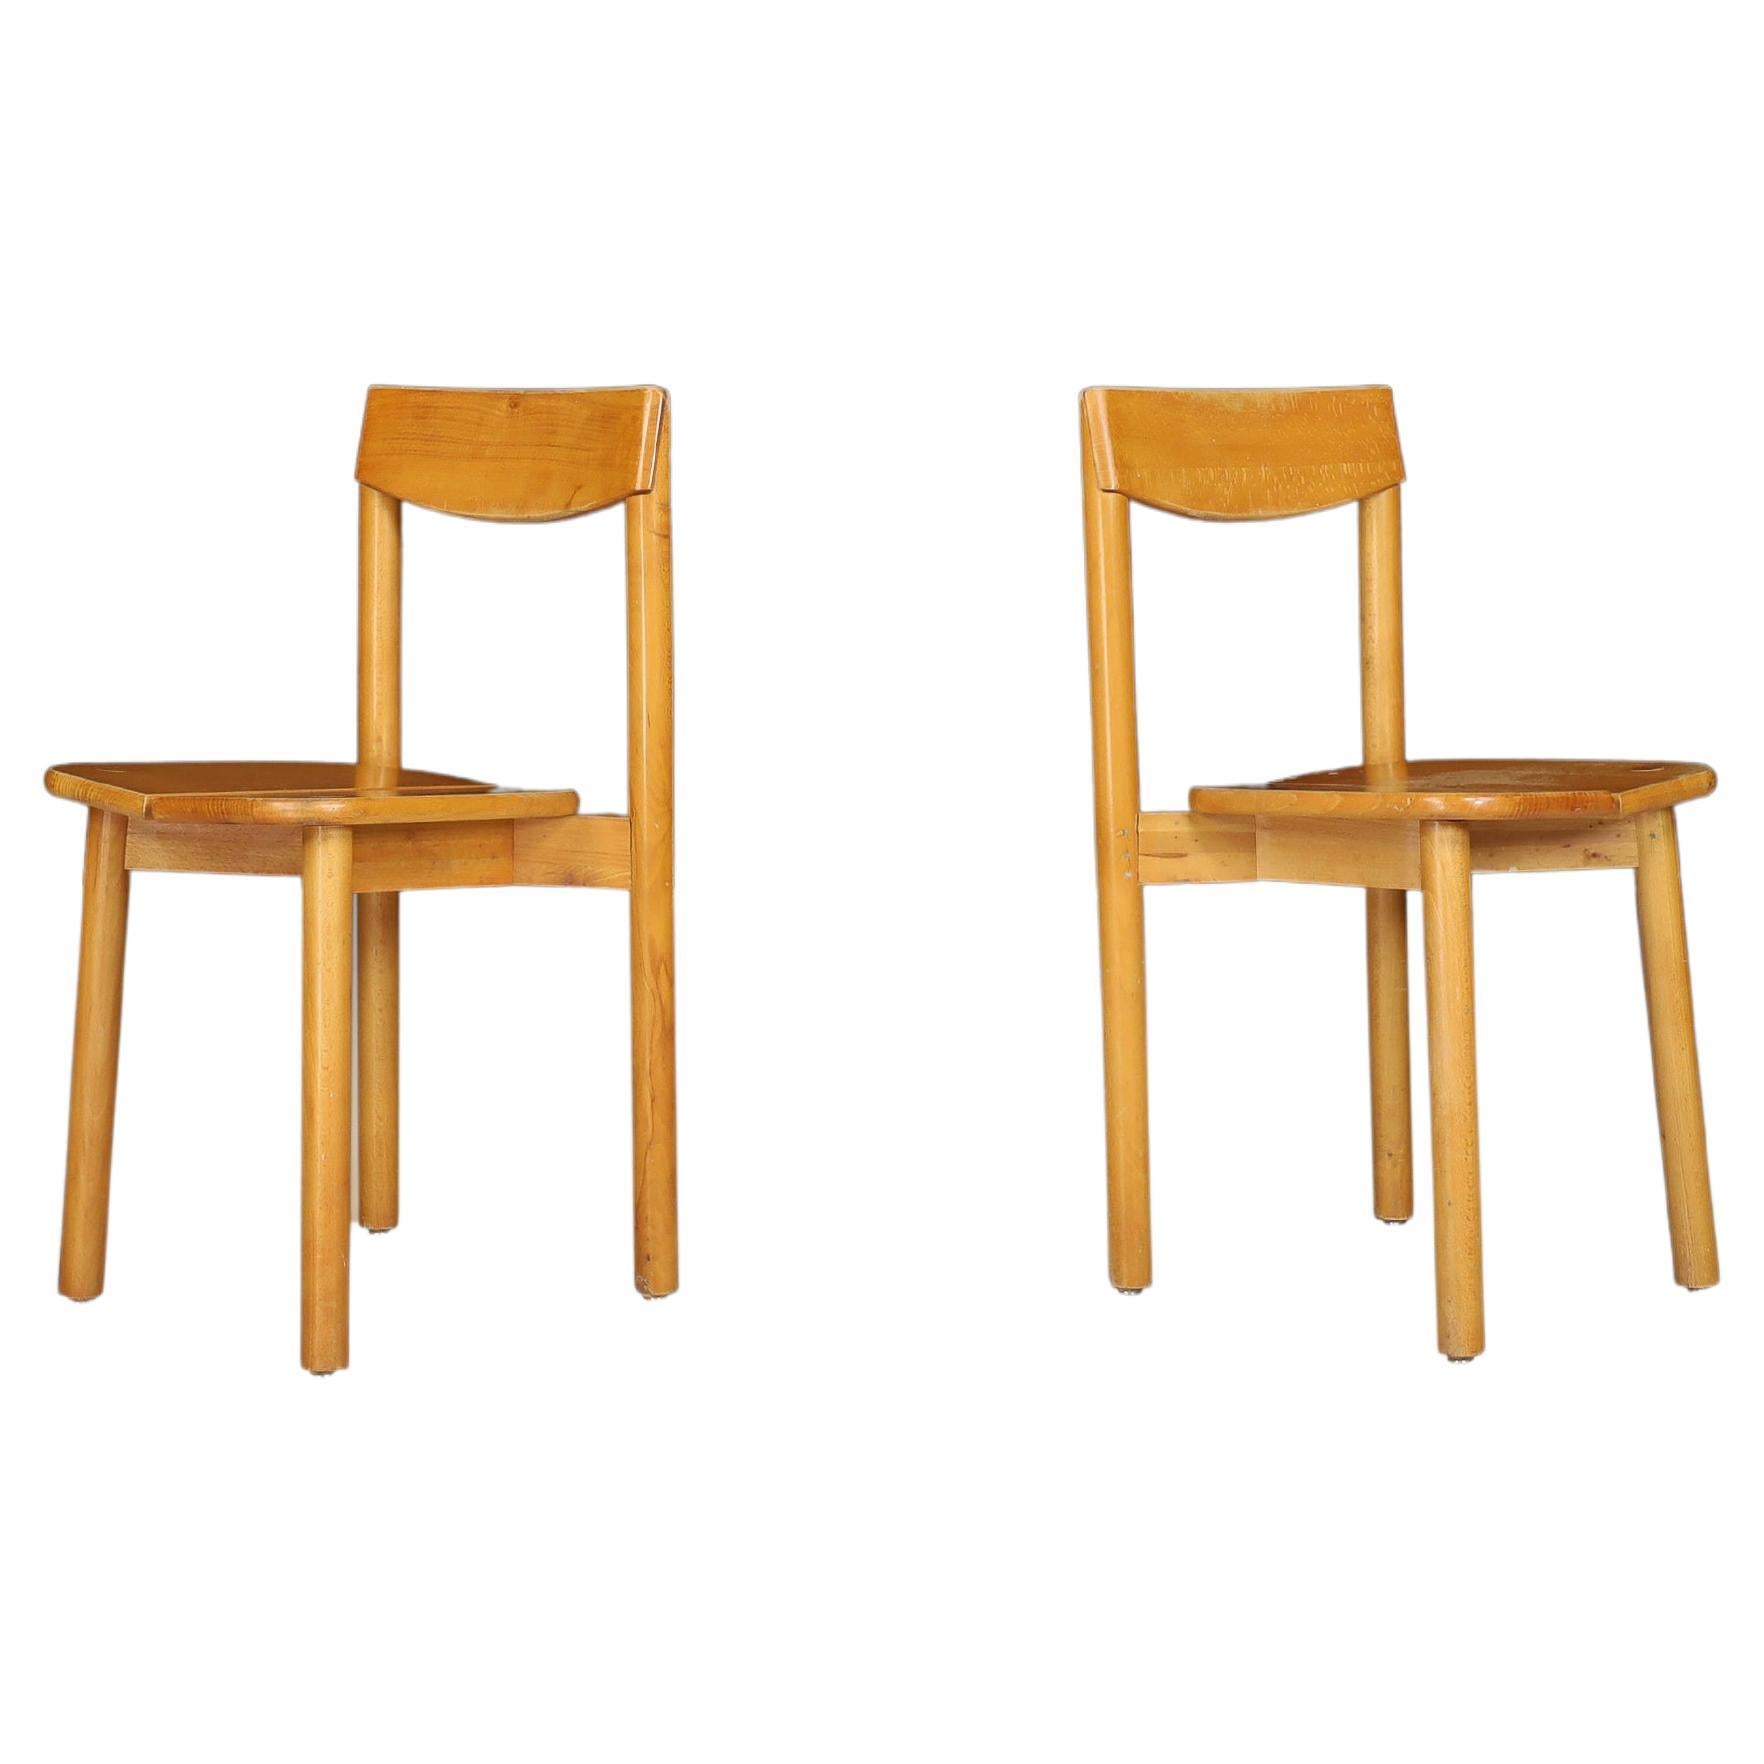 Pierre Gautier Solid Chairs in Blond Beech, France, 1960s For Sale